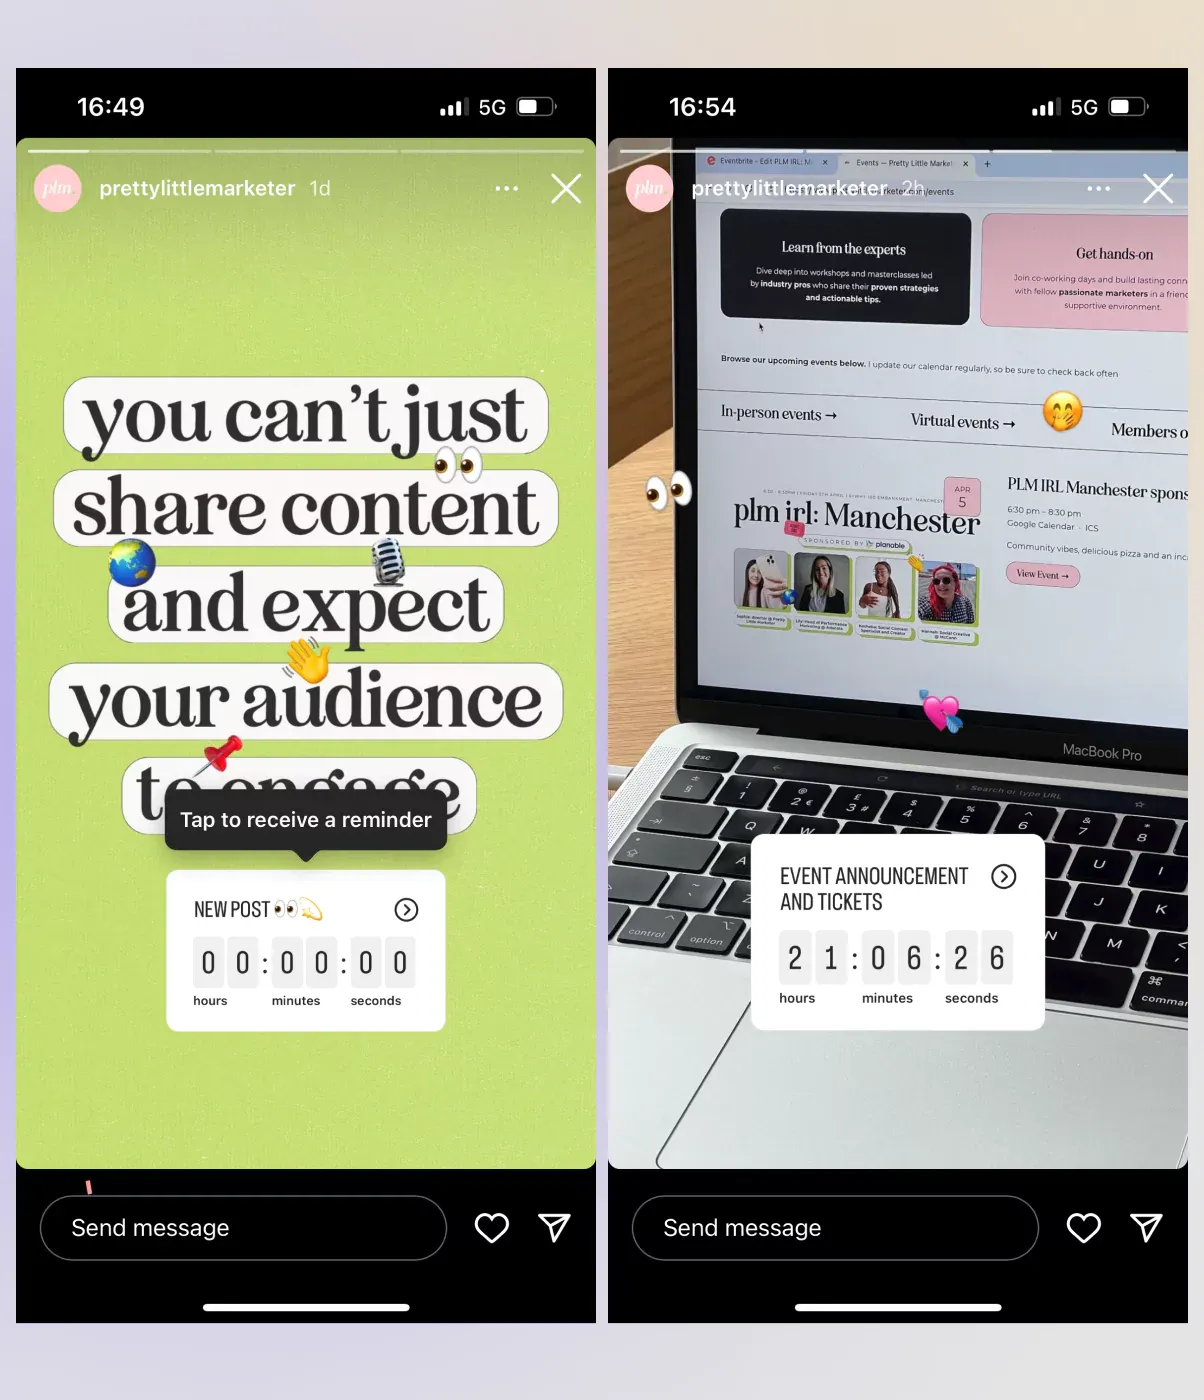 How PrettyLittleMarketing uses Instagram stories stickers